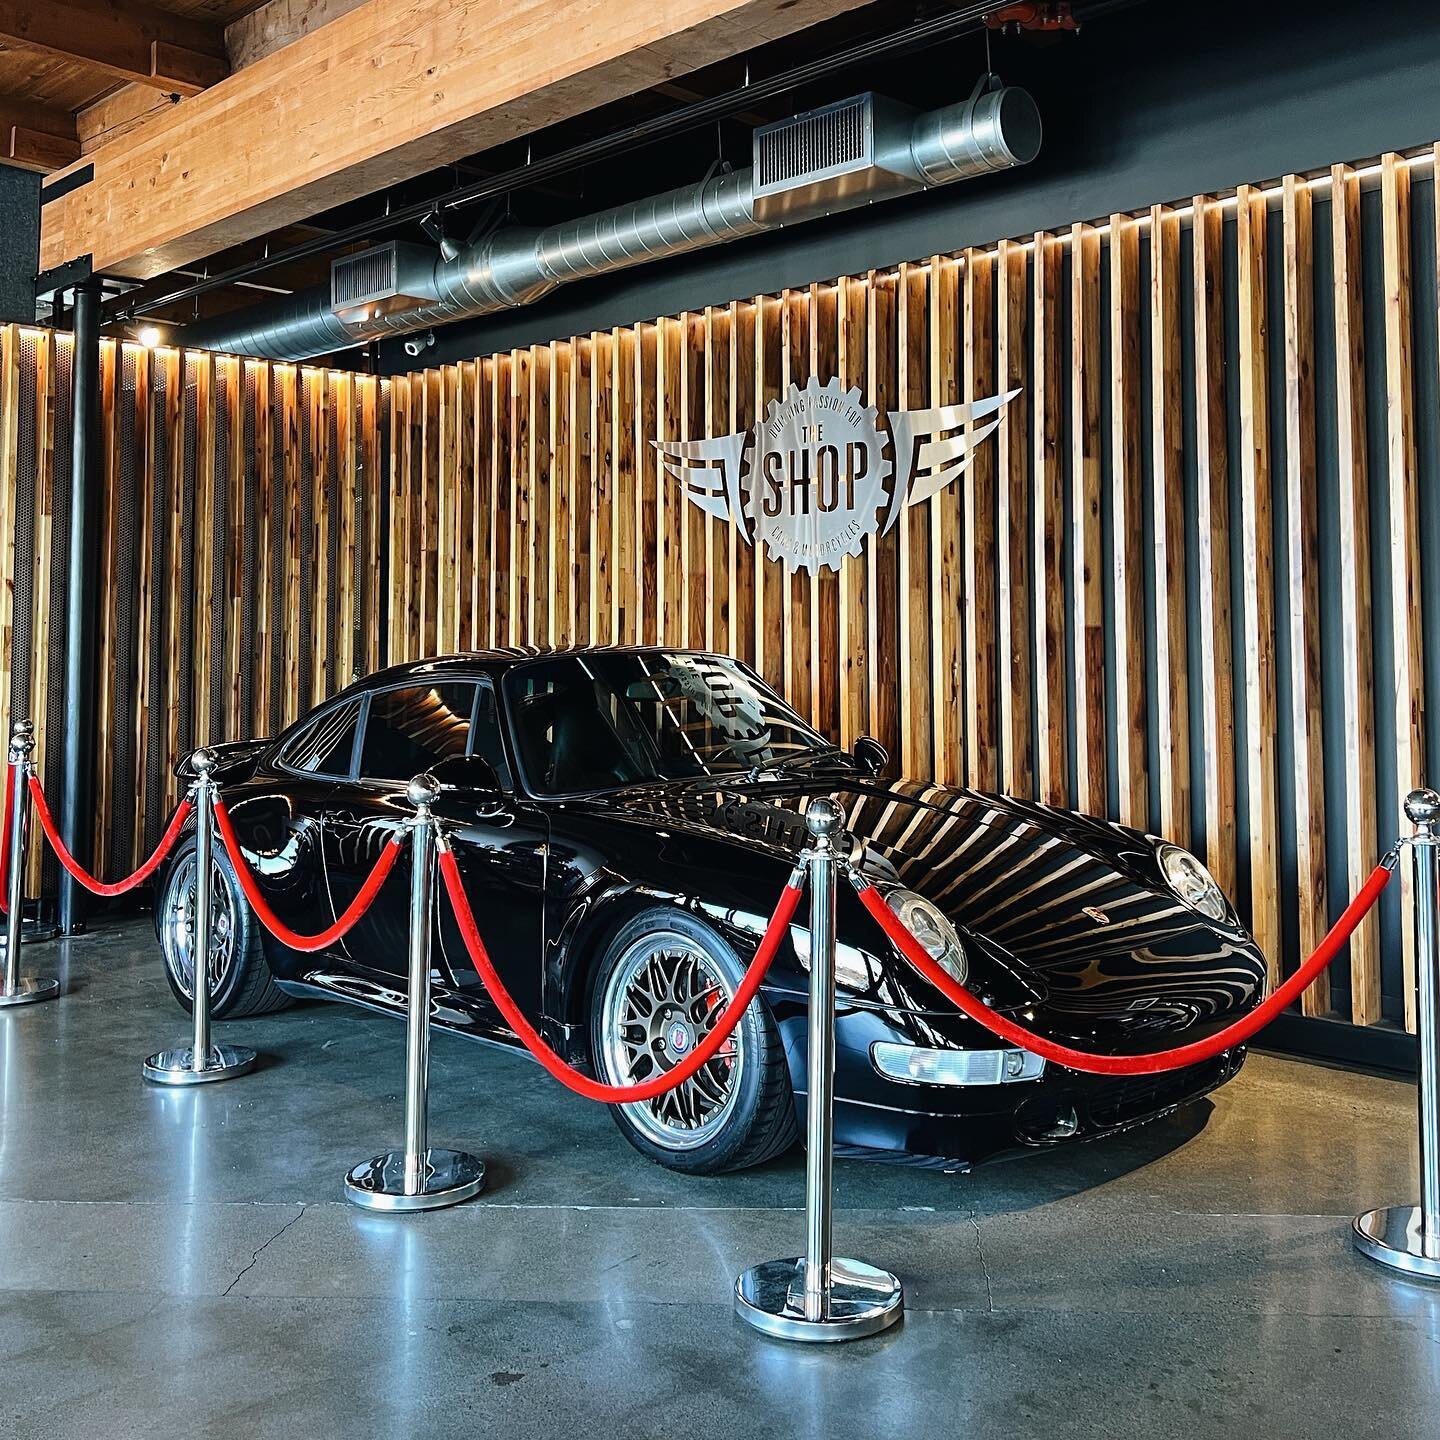 It&rsquo;s always a treat when you walk into @theshopclubs. You never know what will be parked in the lobby as you enter! 

By the way, mark your calendars for June 24th. We&rsquo;ve got some things planned. 👀😎